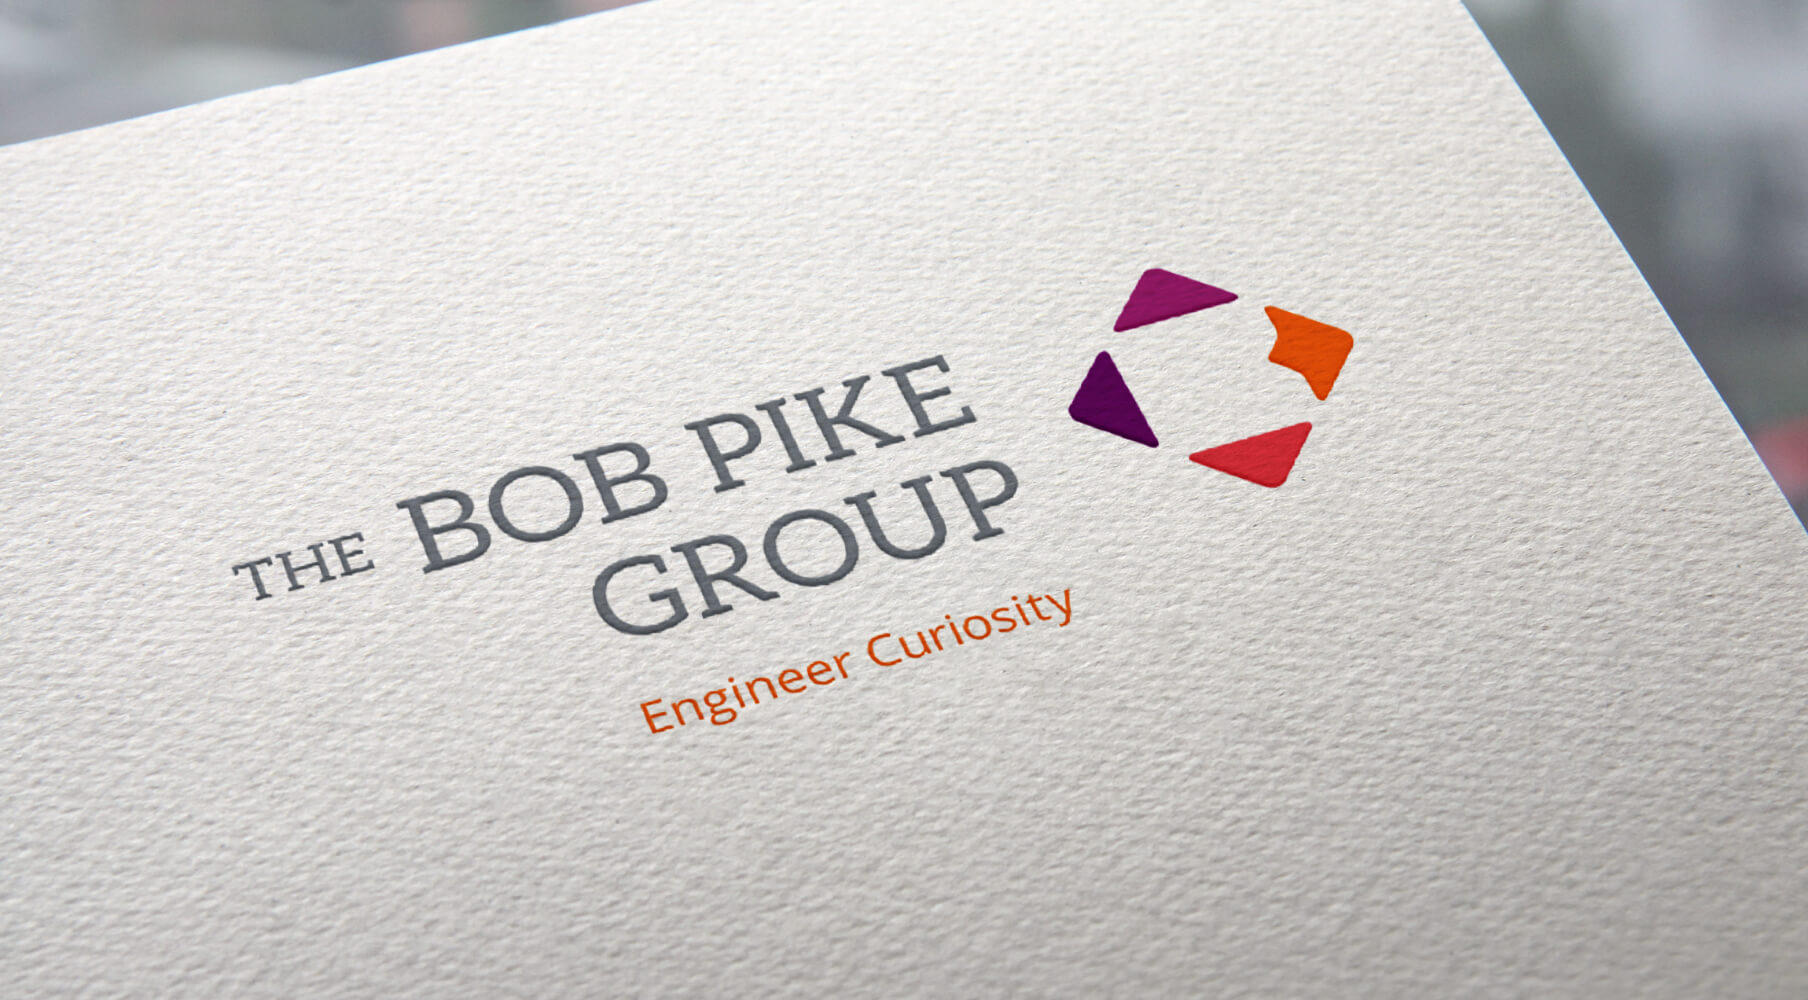 the bob pike group logo on a letter